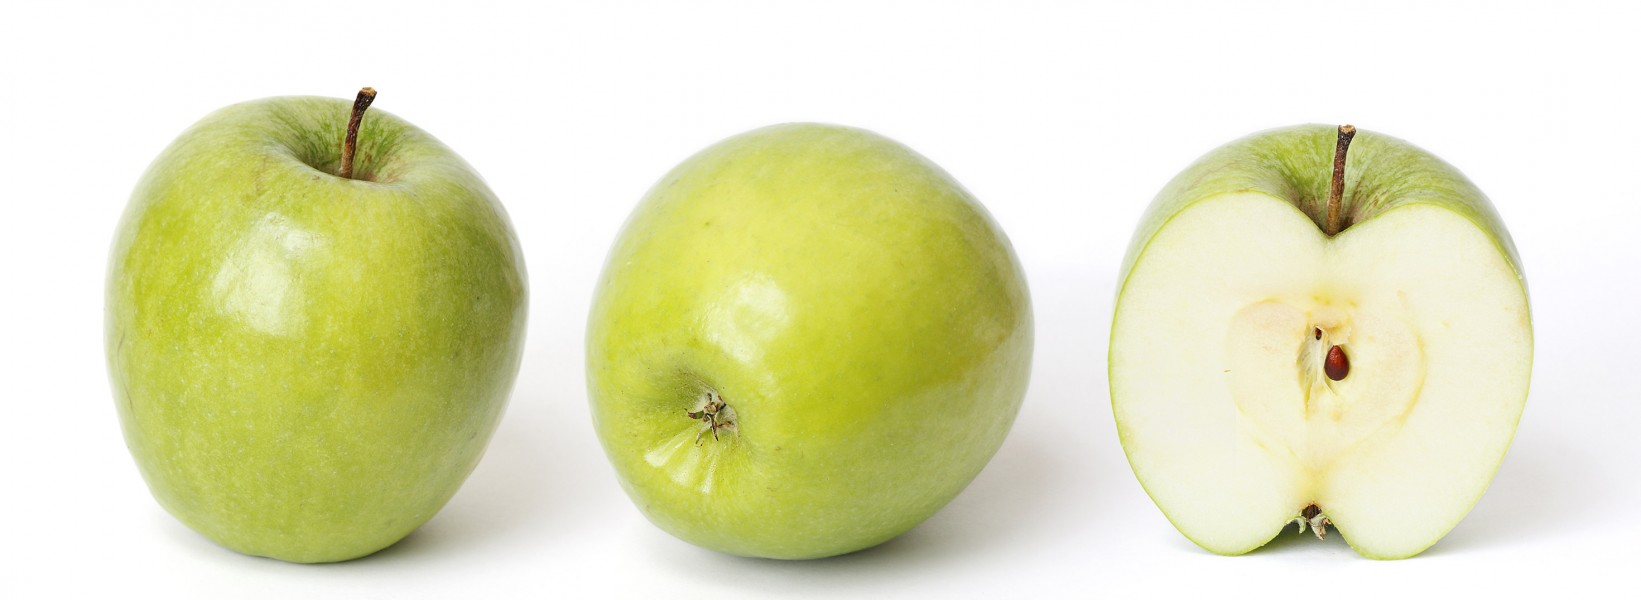 Granny smith and cross section 02